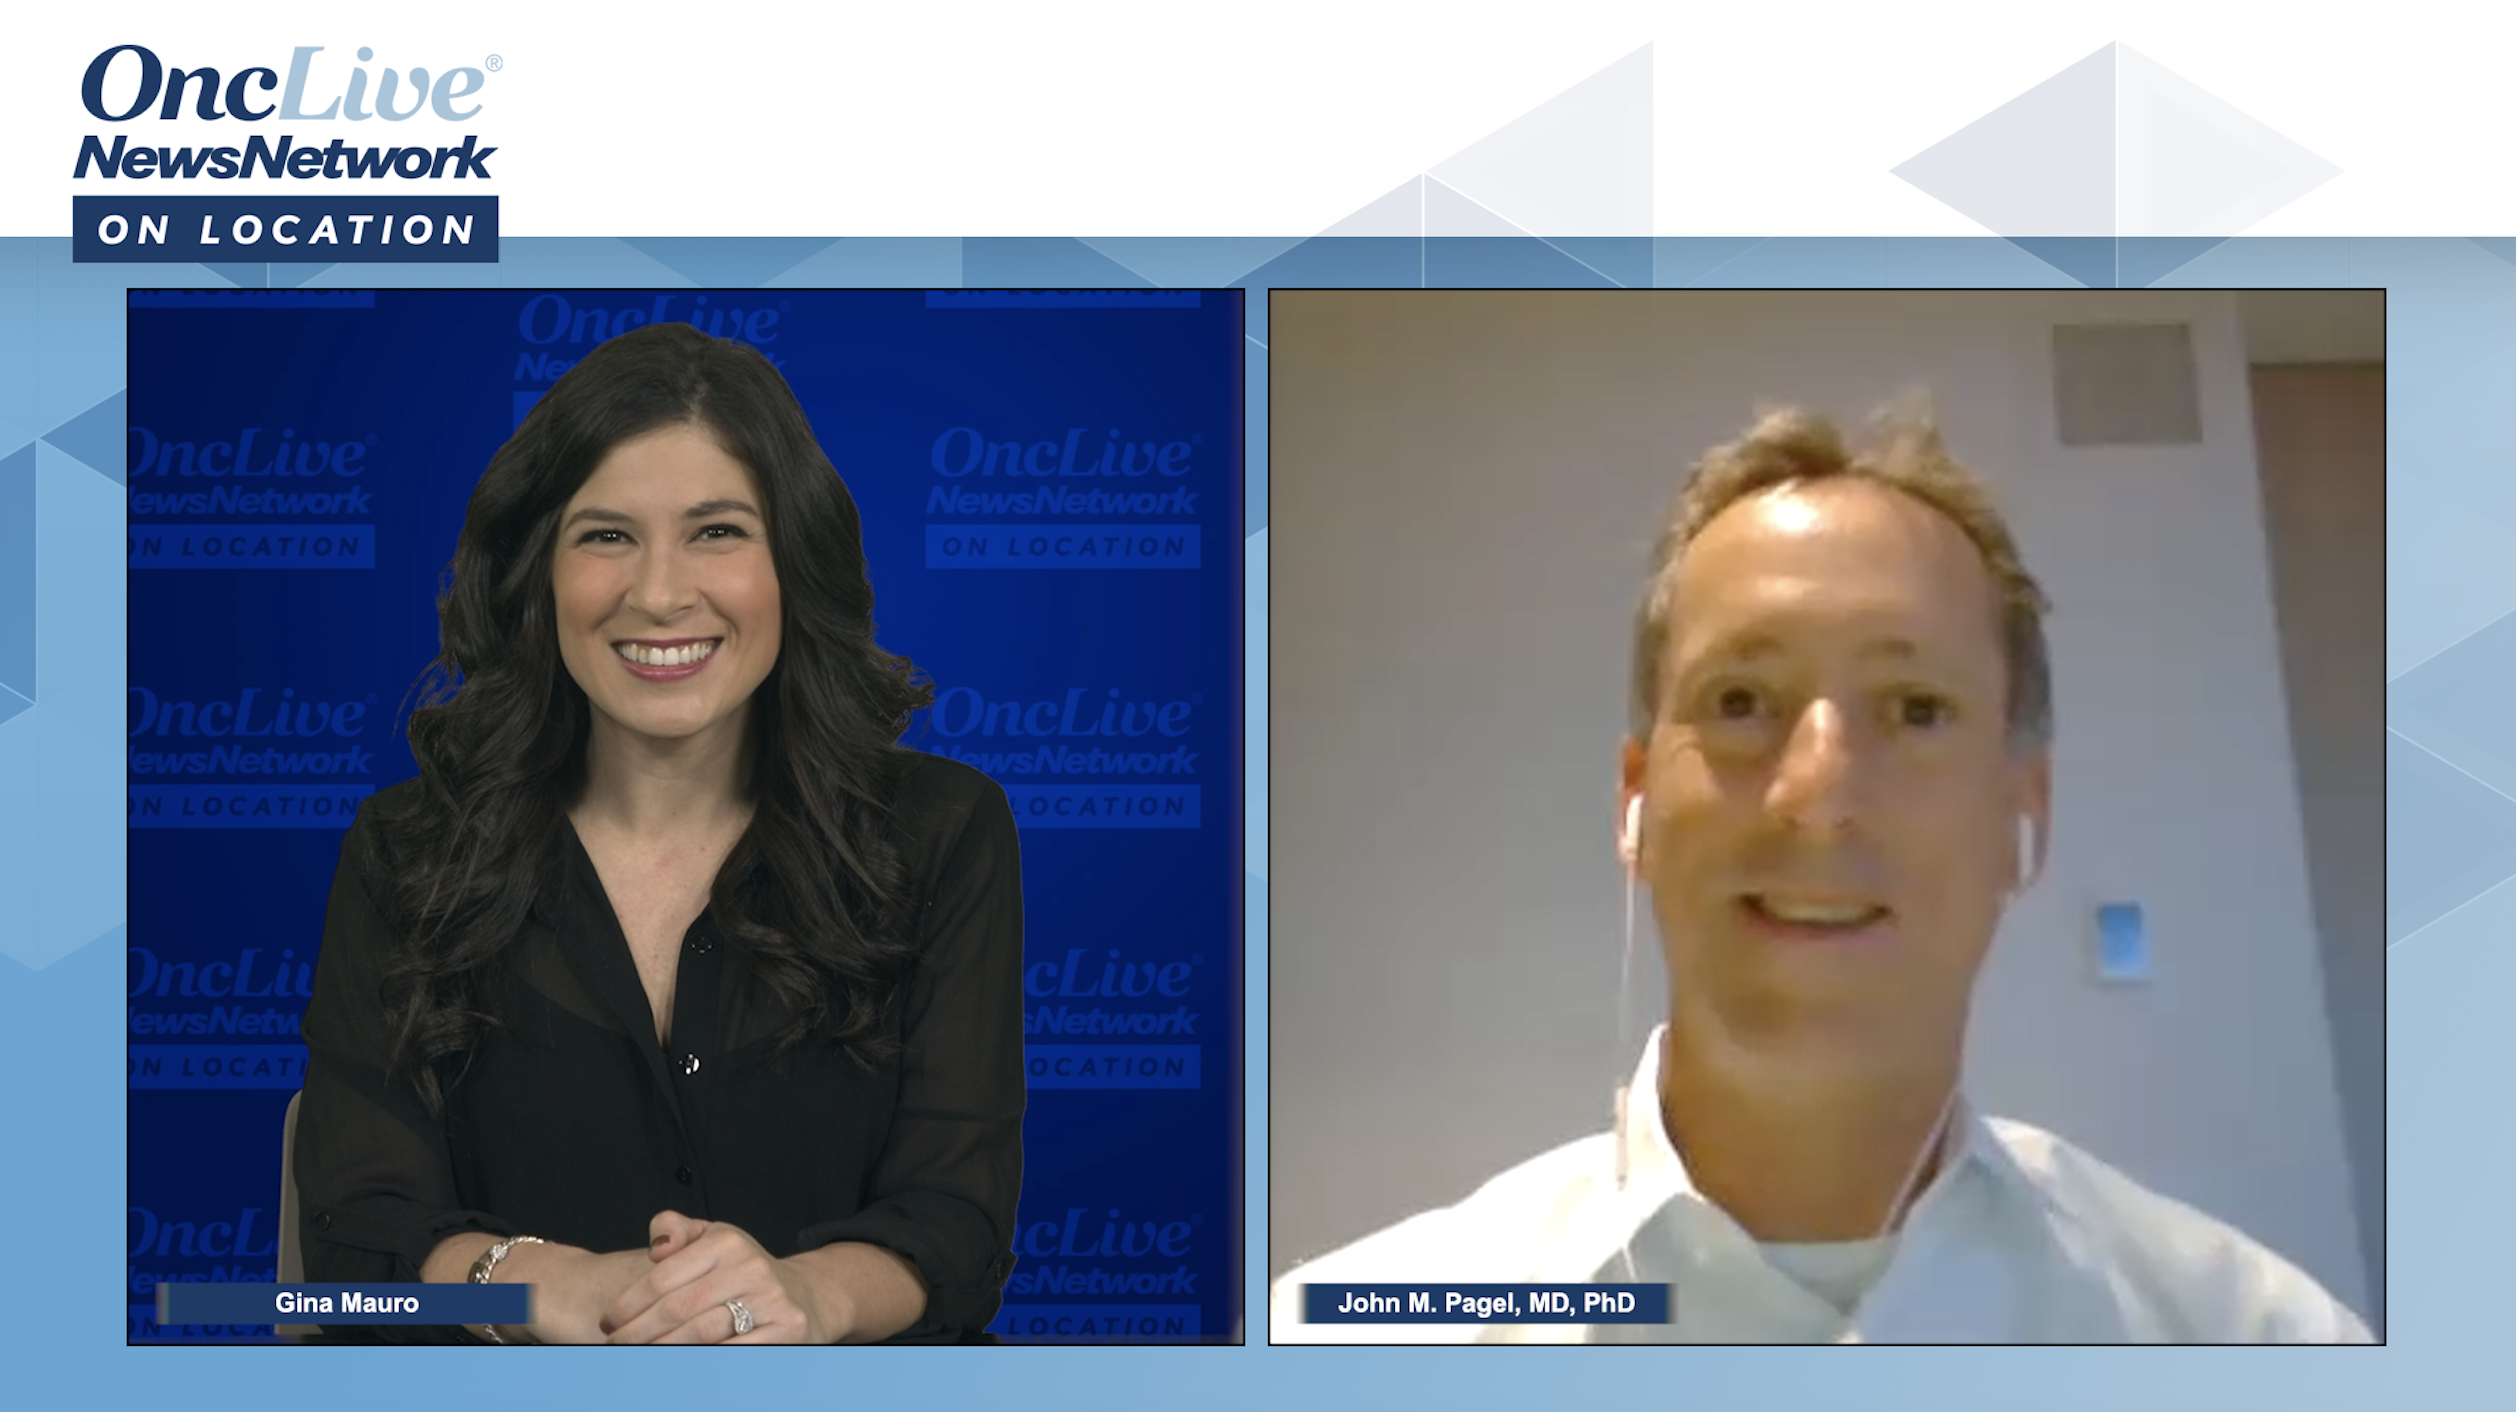 Gina Mauro, OncLive, and John M. Pagel, MD, PhD